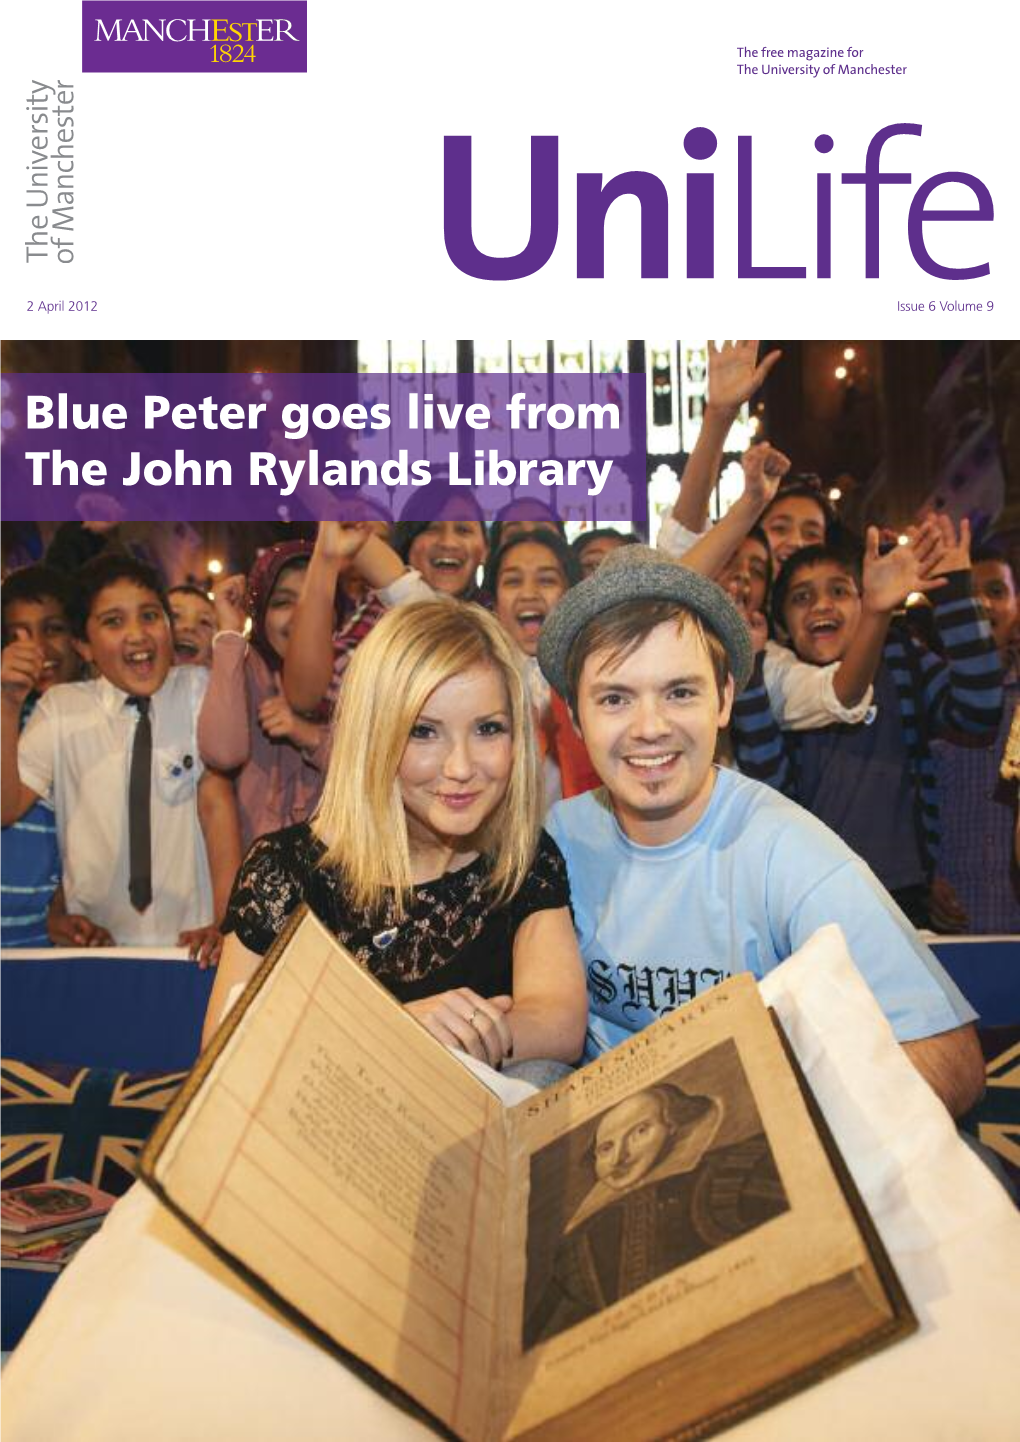 Blue Peter Goes Live from the John Rylands Library 2 Message from the President